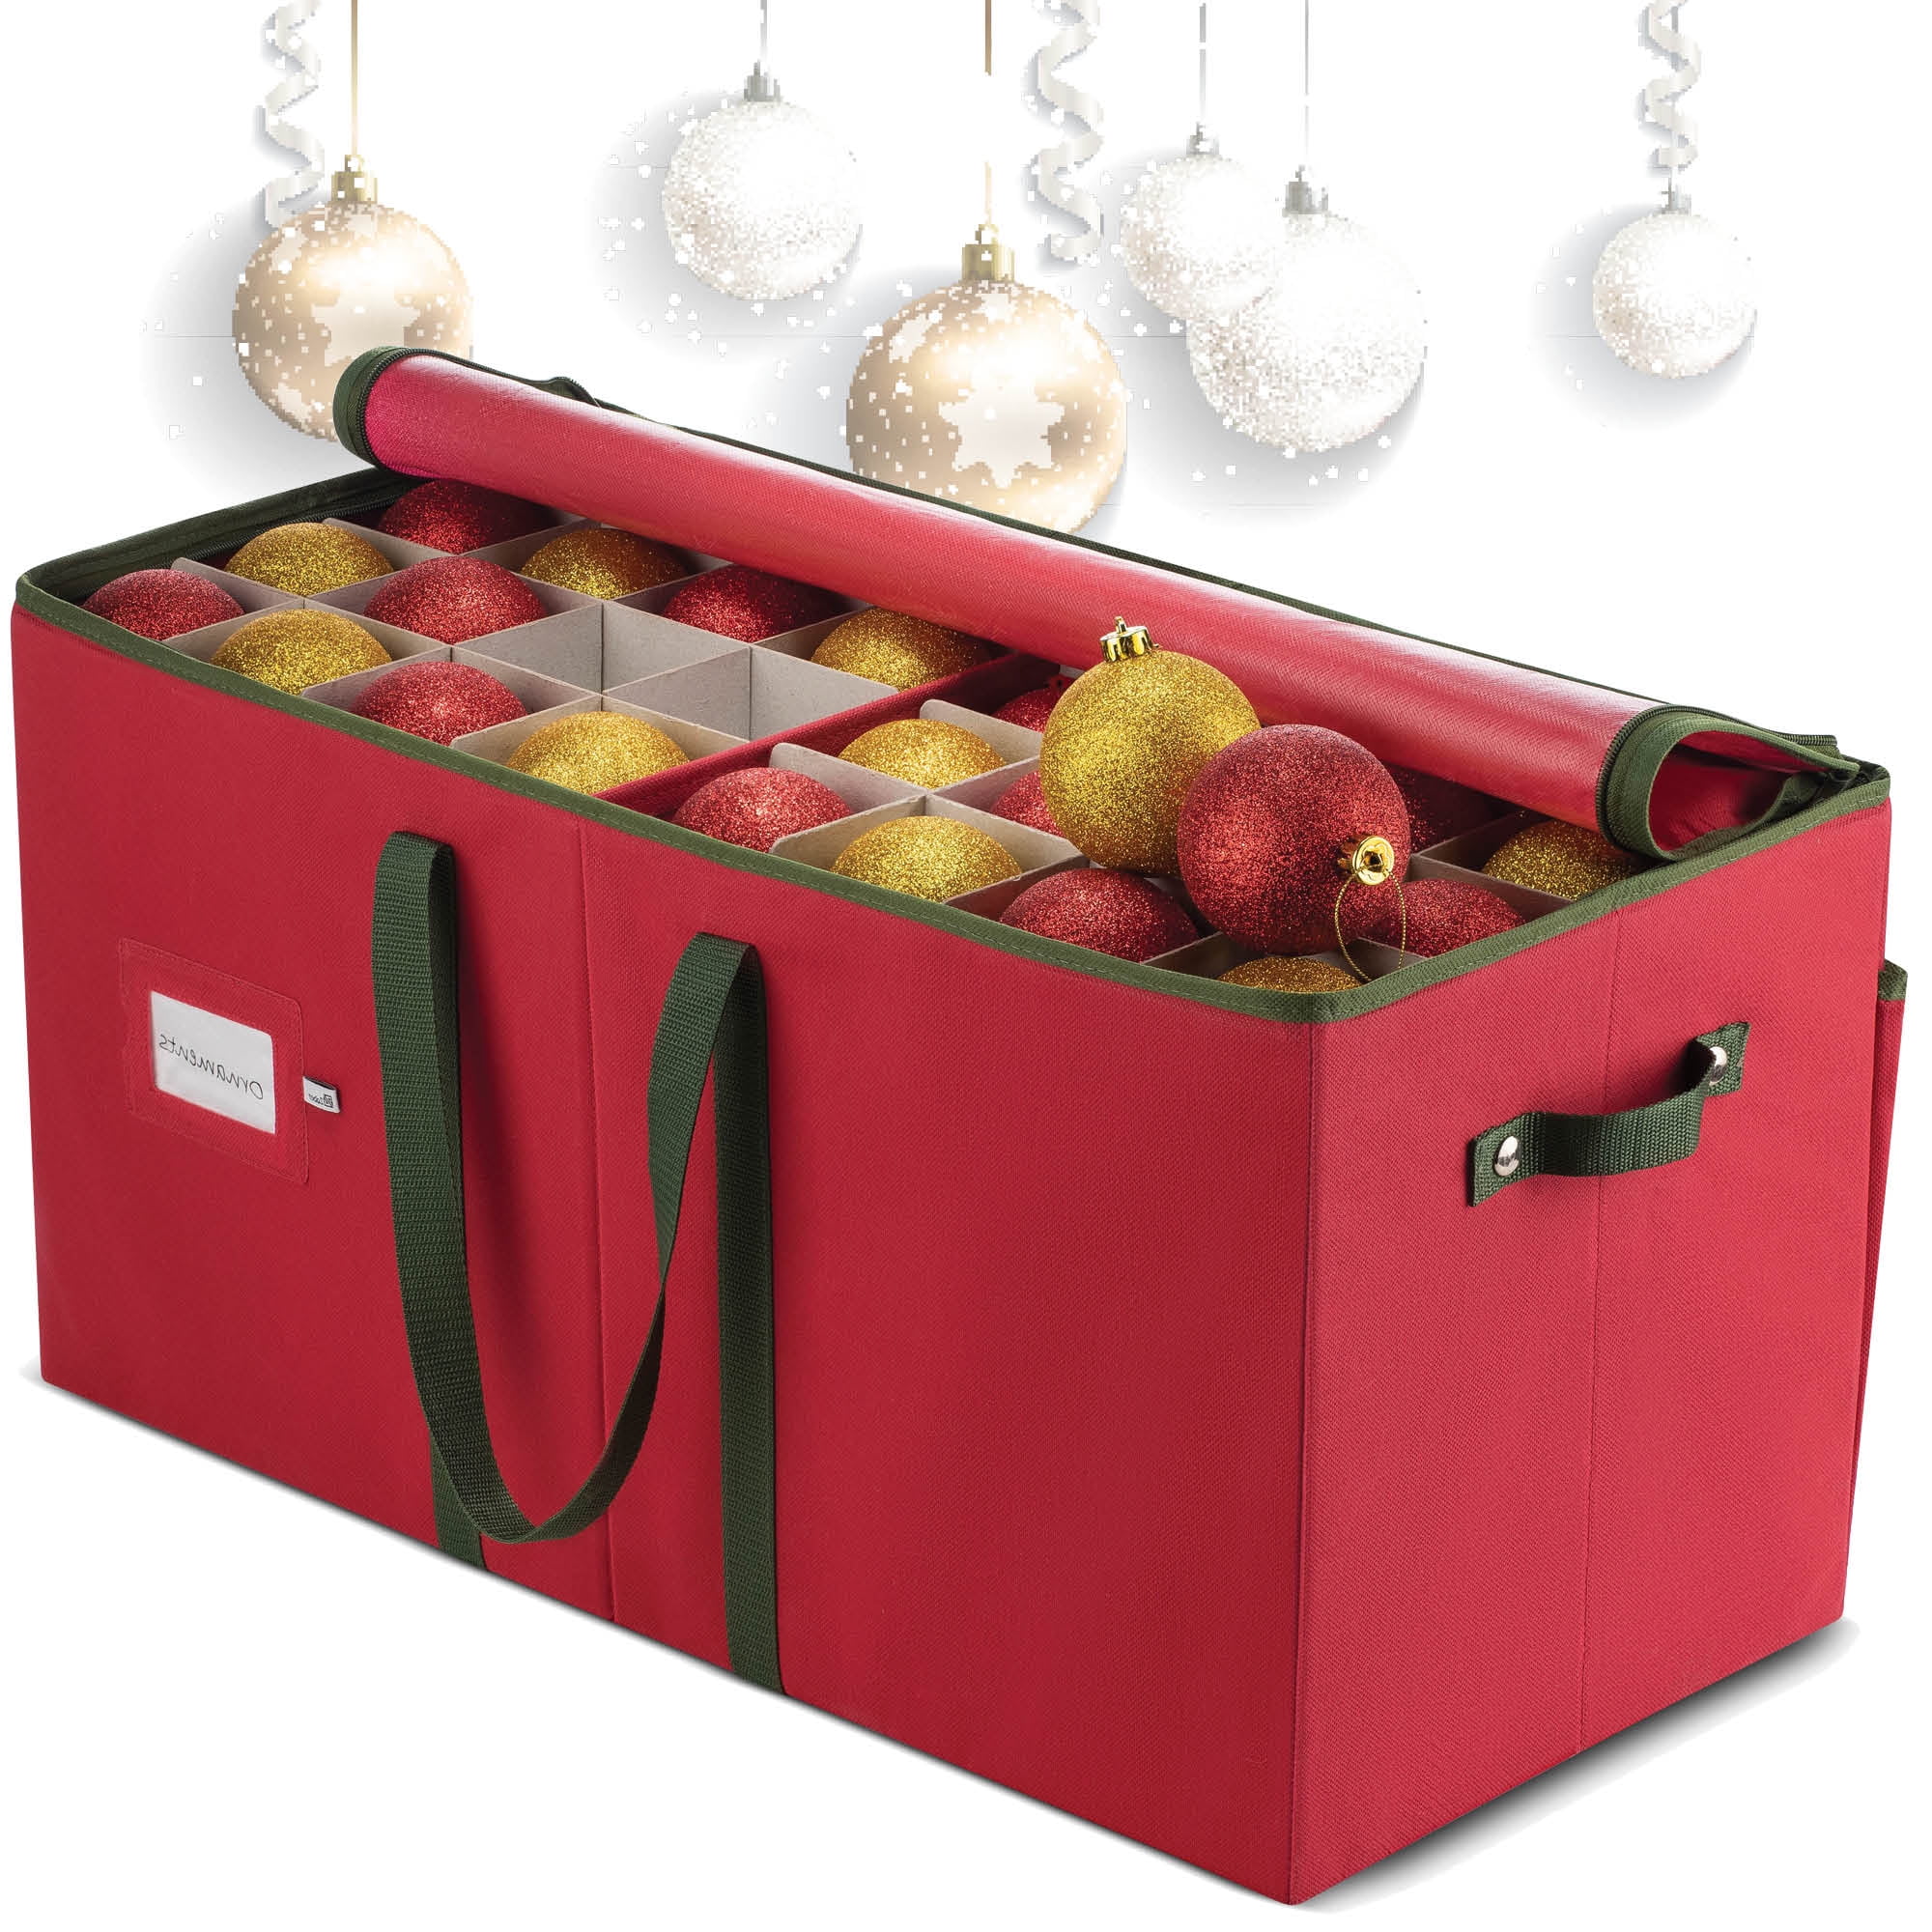 New Christmas Decoration Storage for Small Space